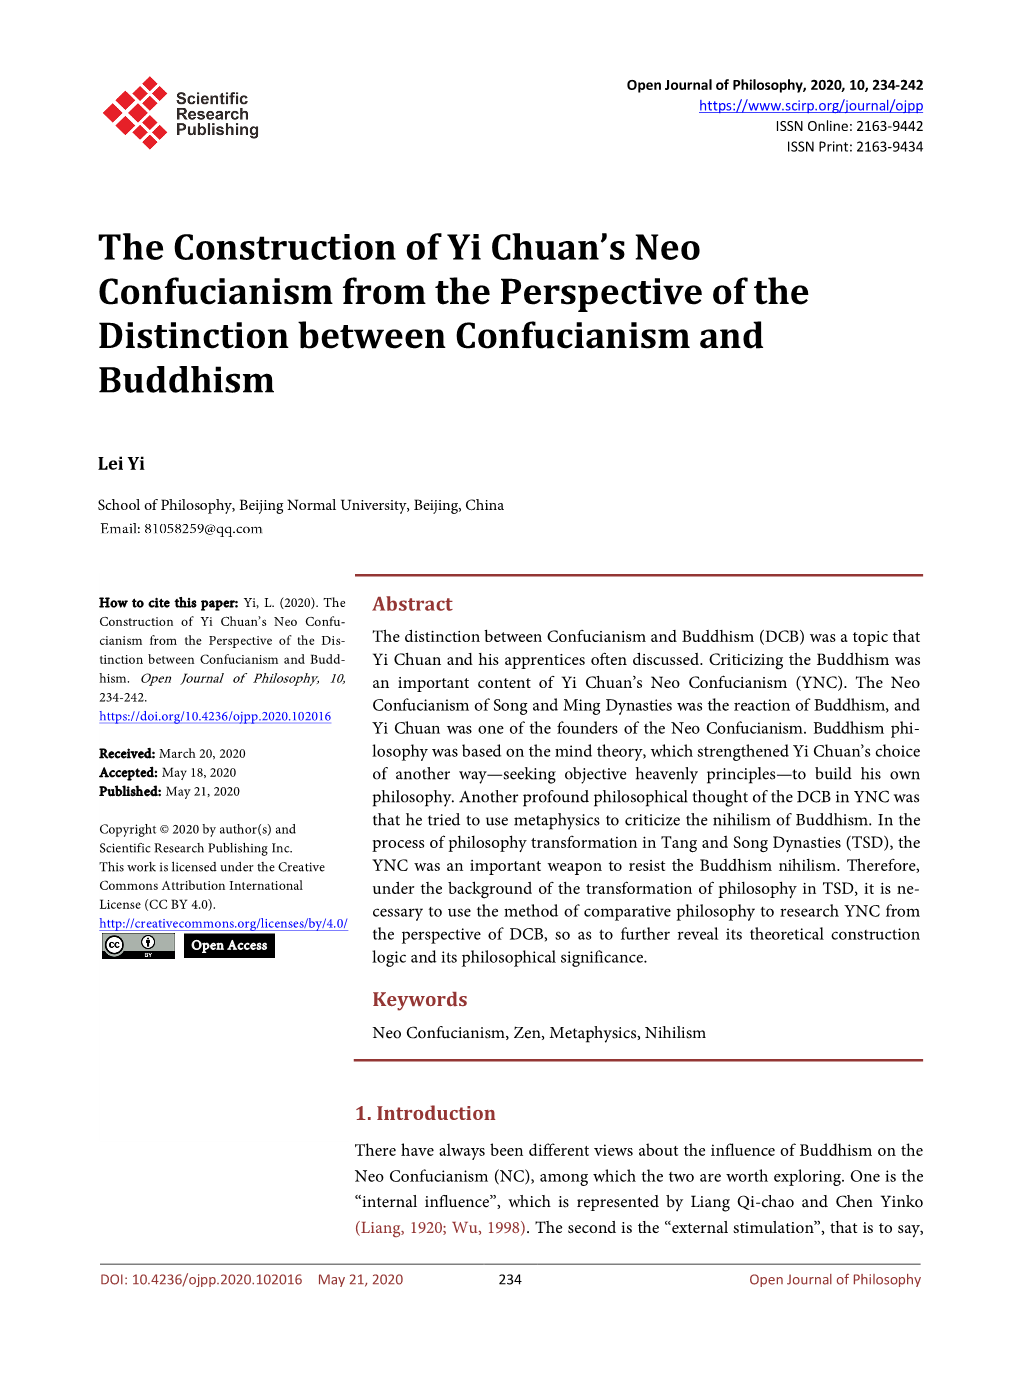 The Construction of Yi Chuan's Neo Confucianism from the Perspective